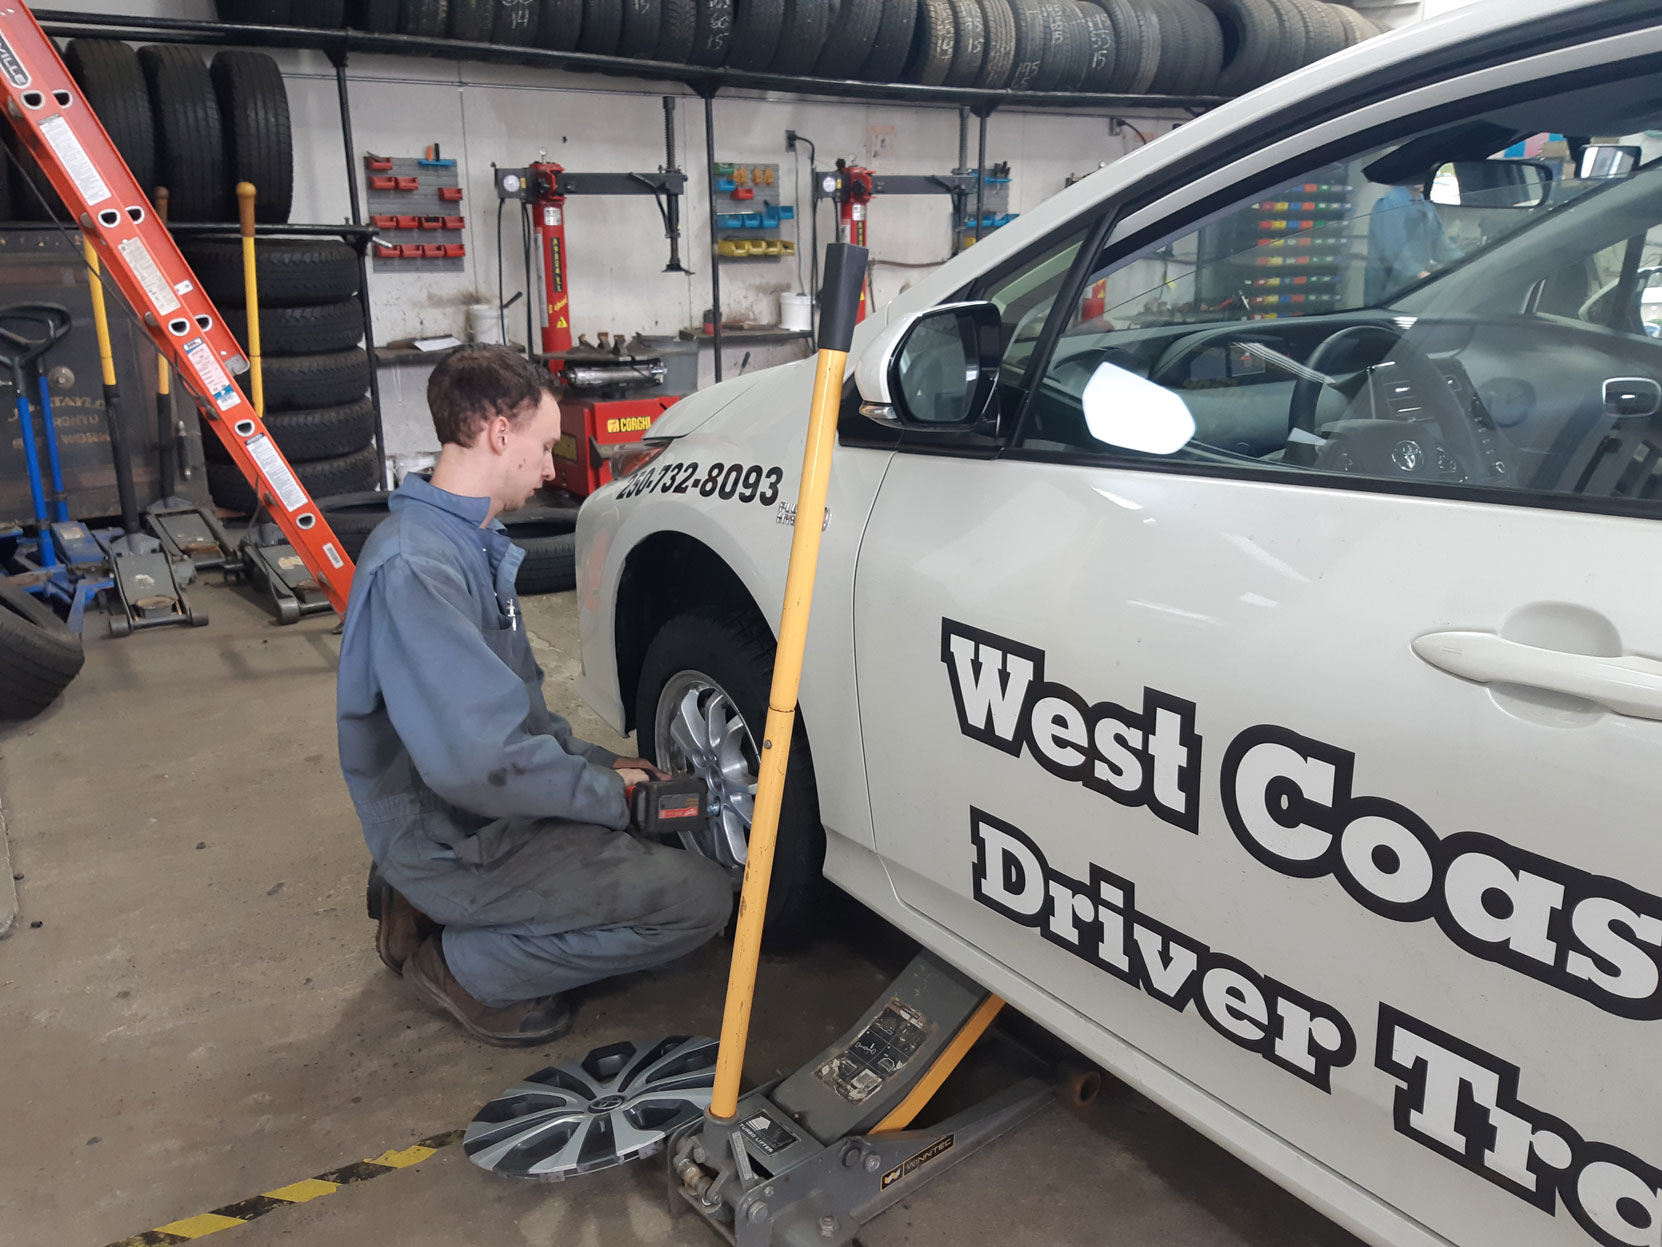 Our 2020 Prius Prime having a new set of Michelin winter tires put on at Joe's Tire Hospital in Duncan, October 2020 (photo: West Coast Driver Training)